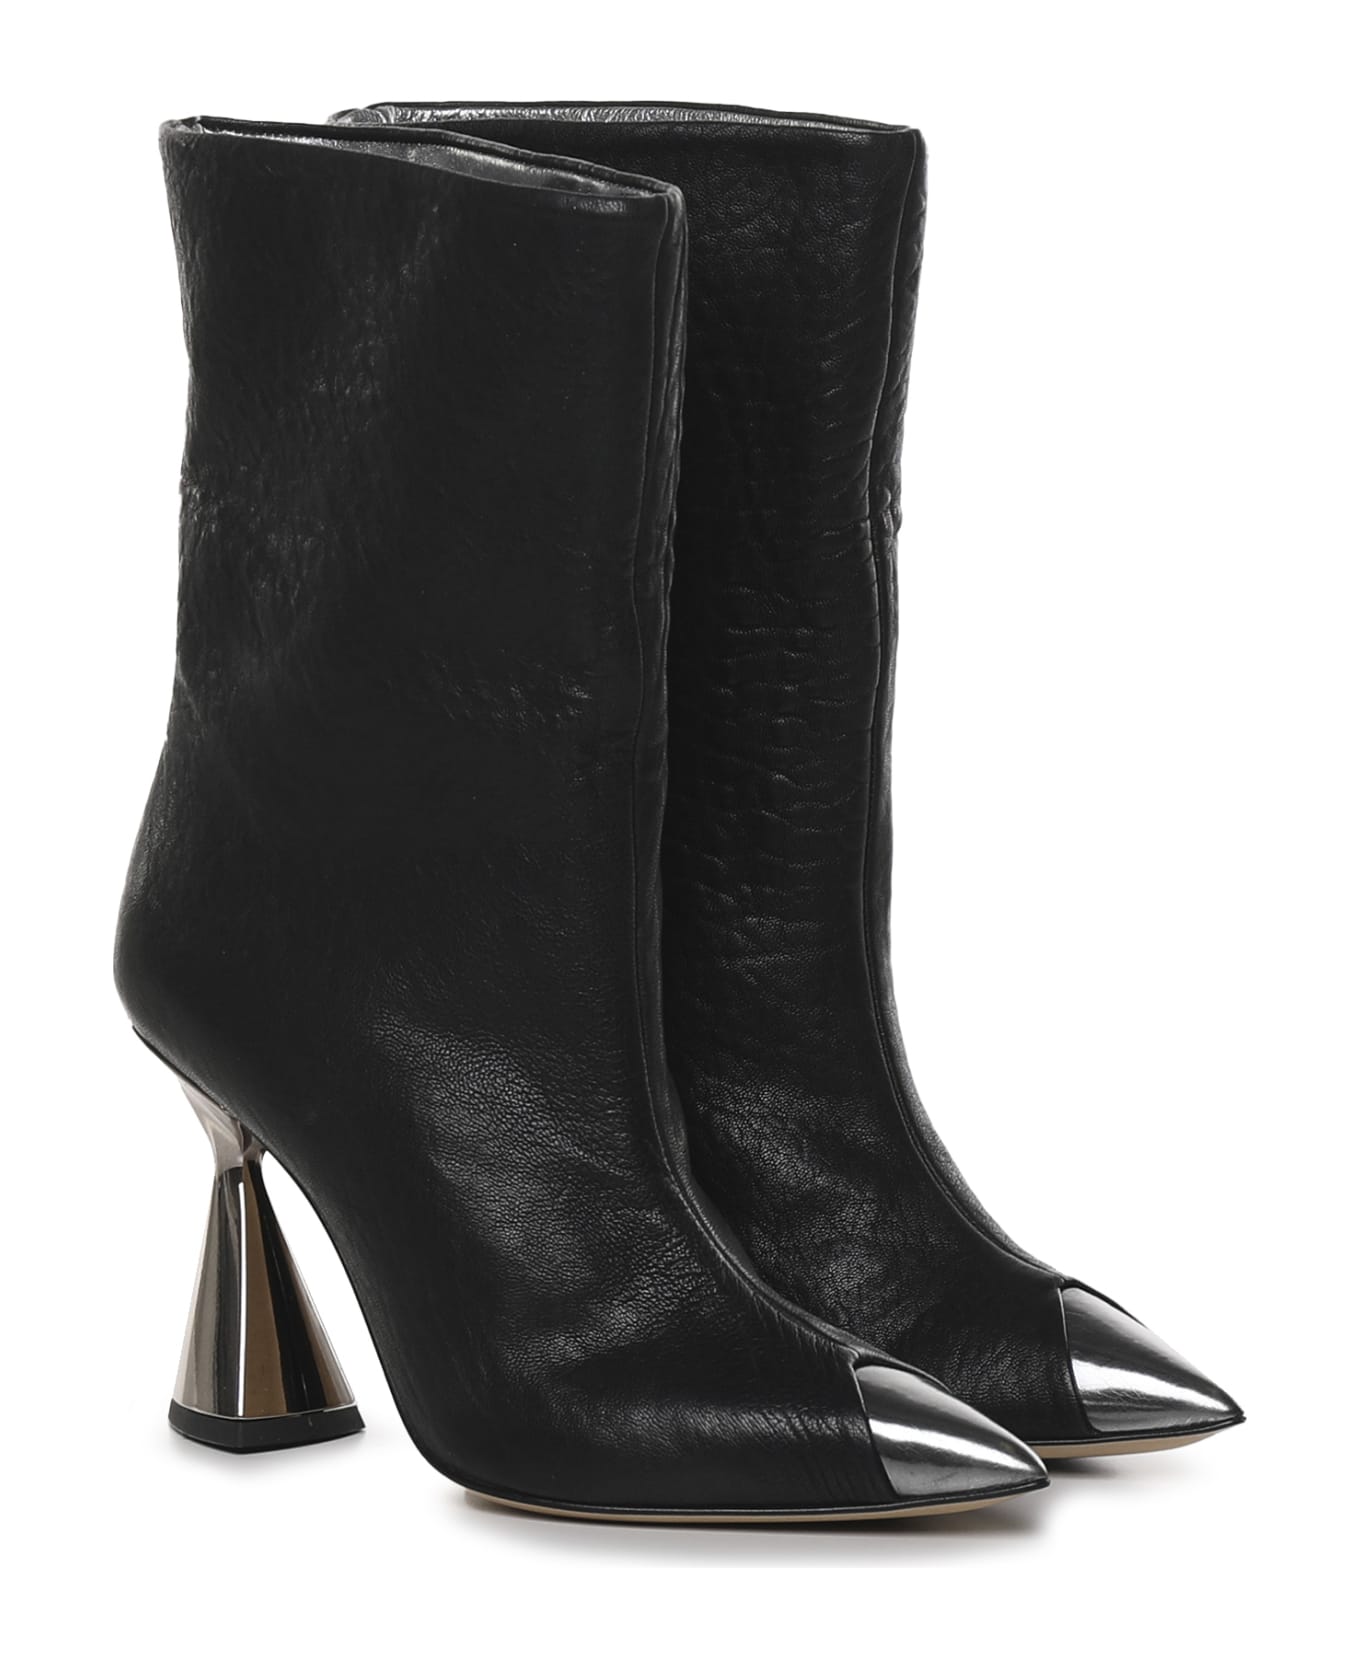 Alchimia Ankle Boots With Contrasting Toe - Black